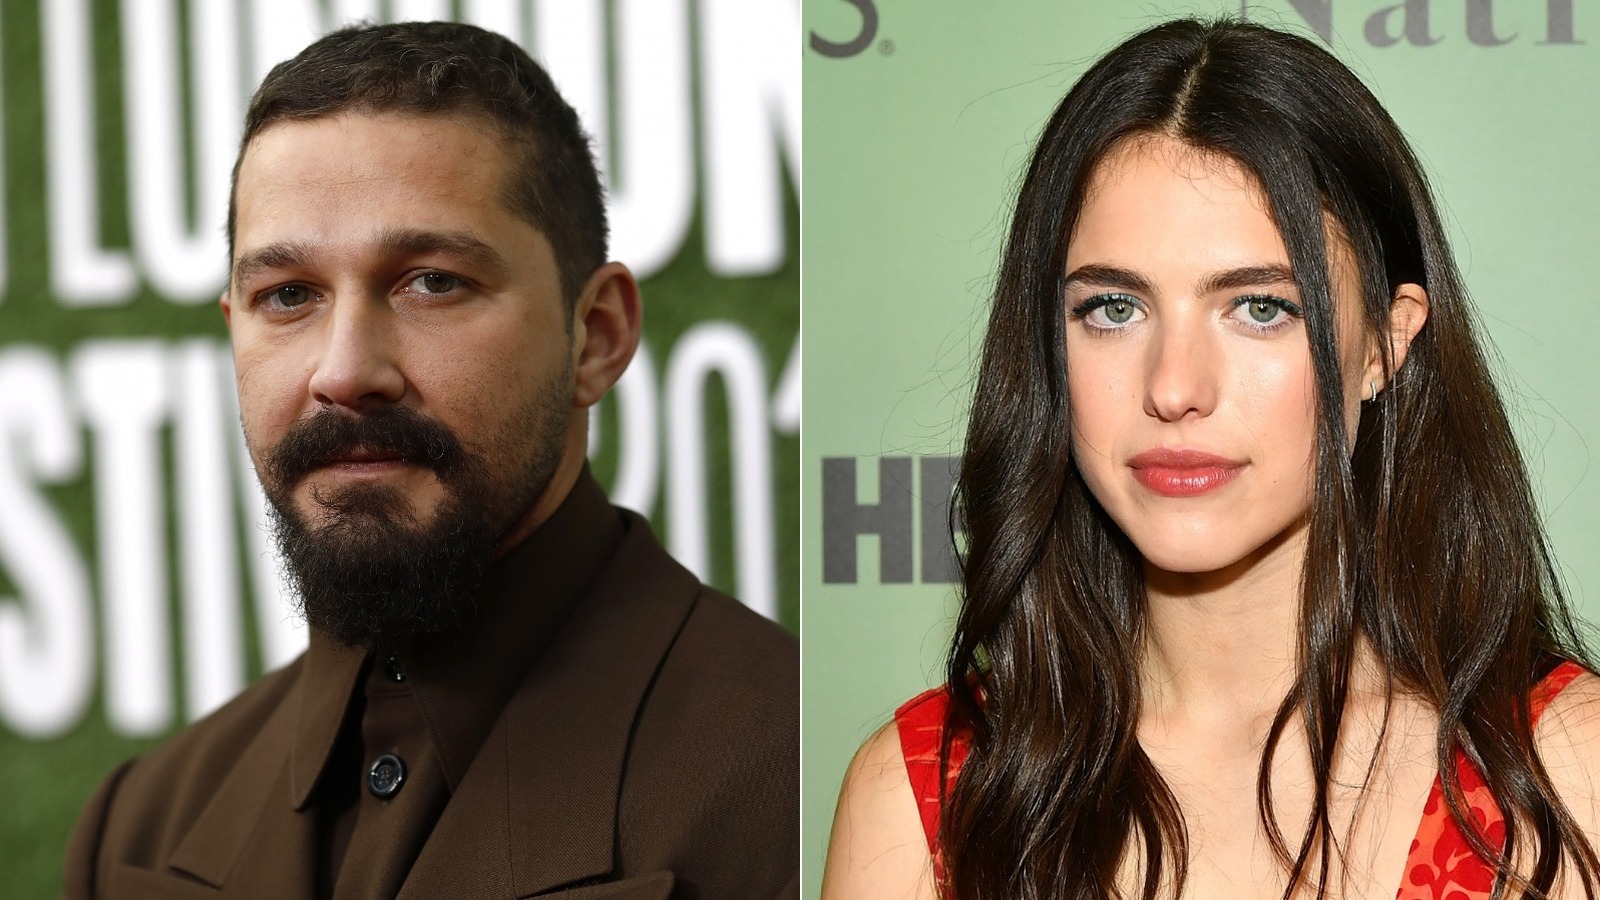 The Truth About Margaret Qualley And Shia Labeouf